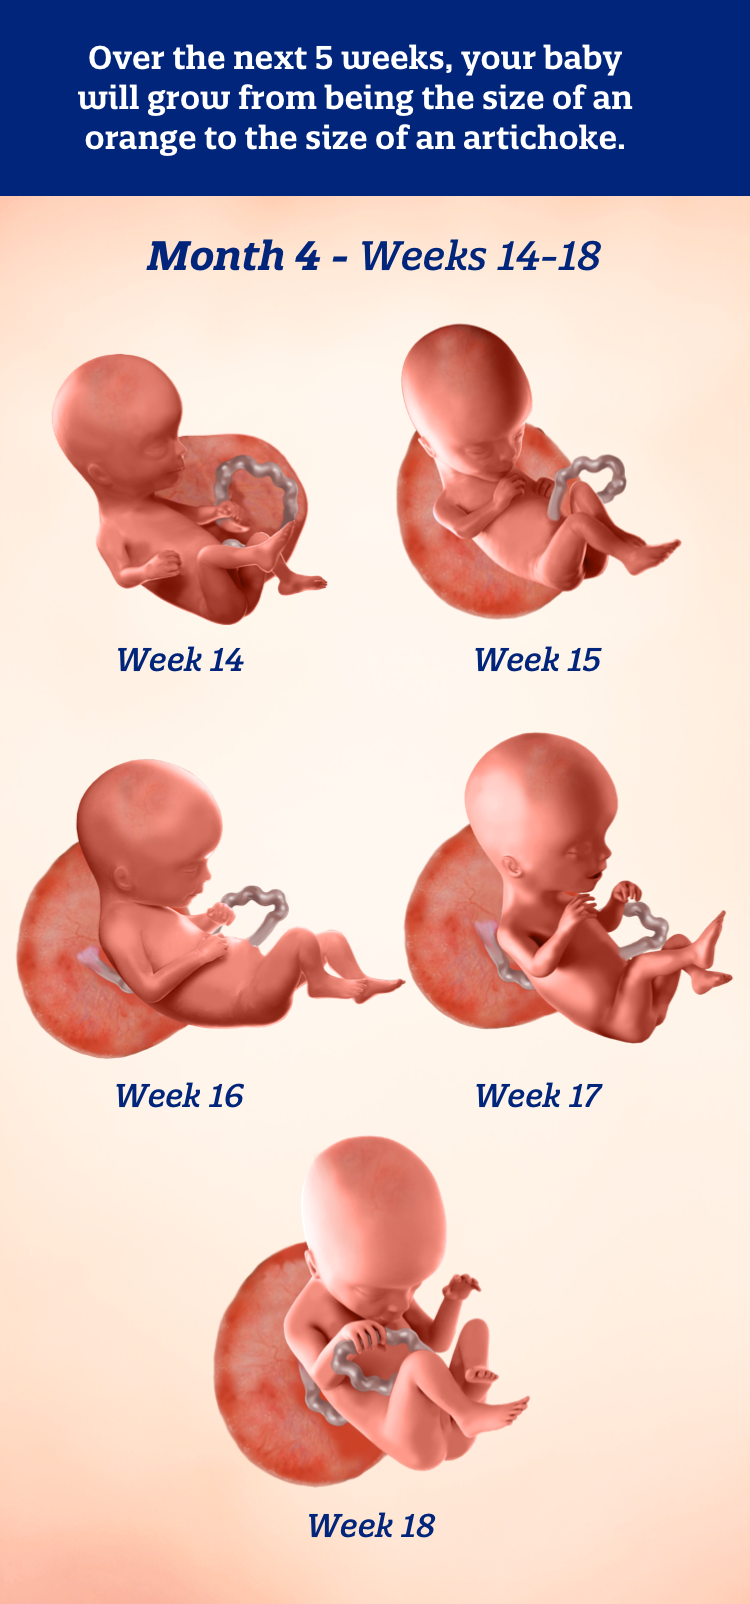 Month 4 weeks 14-18: Over the next 5 weeks, your baby will grow from being the size of an orange to the size of an artichoke.